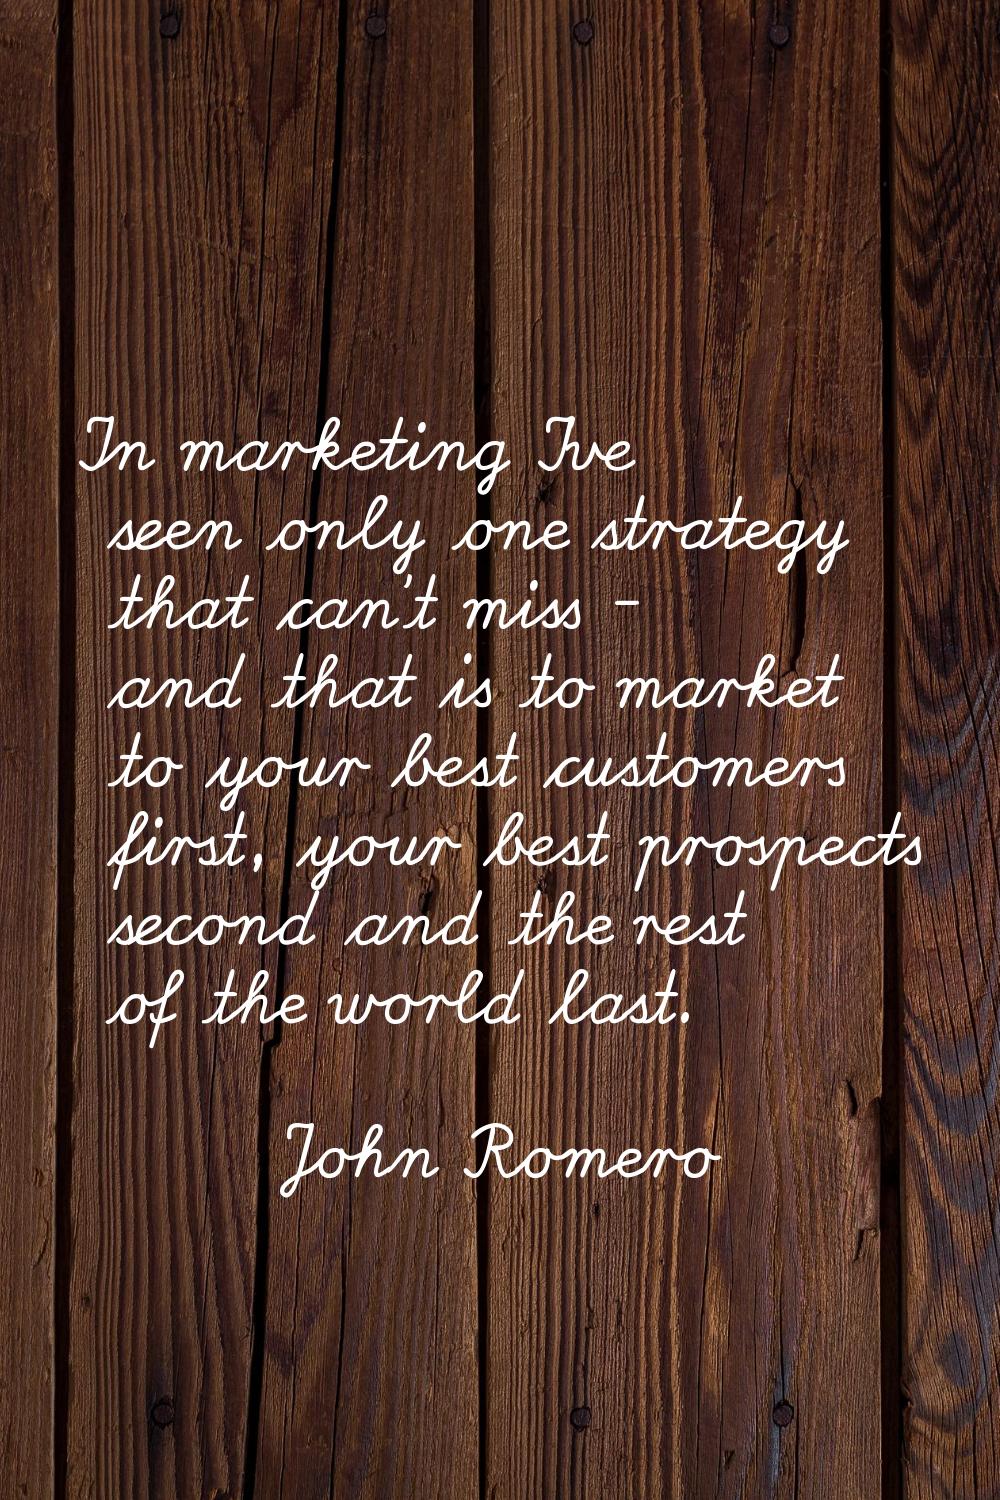 In marketing I've seen only one strategy that can't miss - and that is to market to your best custo